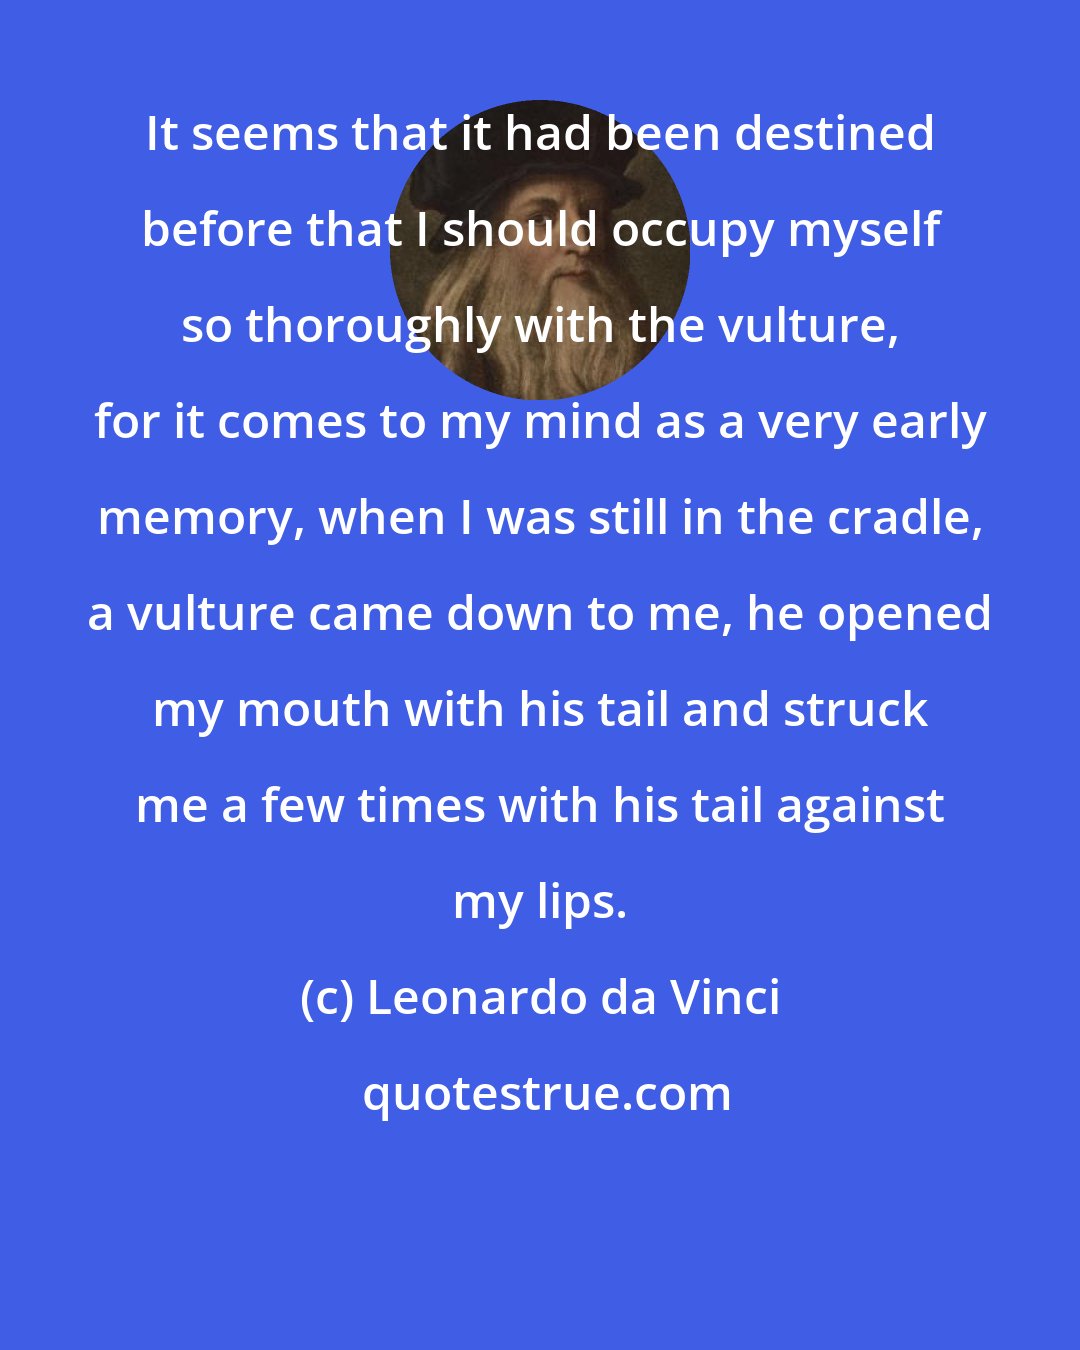 Leonardo da Vinci: It seems that it had been destined before that I should occupy myself so thoroughly with the vulture, for it comes to my mind as a very early memory, when I was still in the cradle, a vulture came down to me, he opened my mouth with his tail and struck me a few times with his tail against my lips.